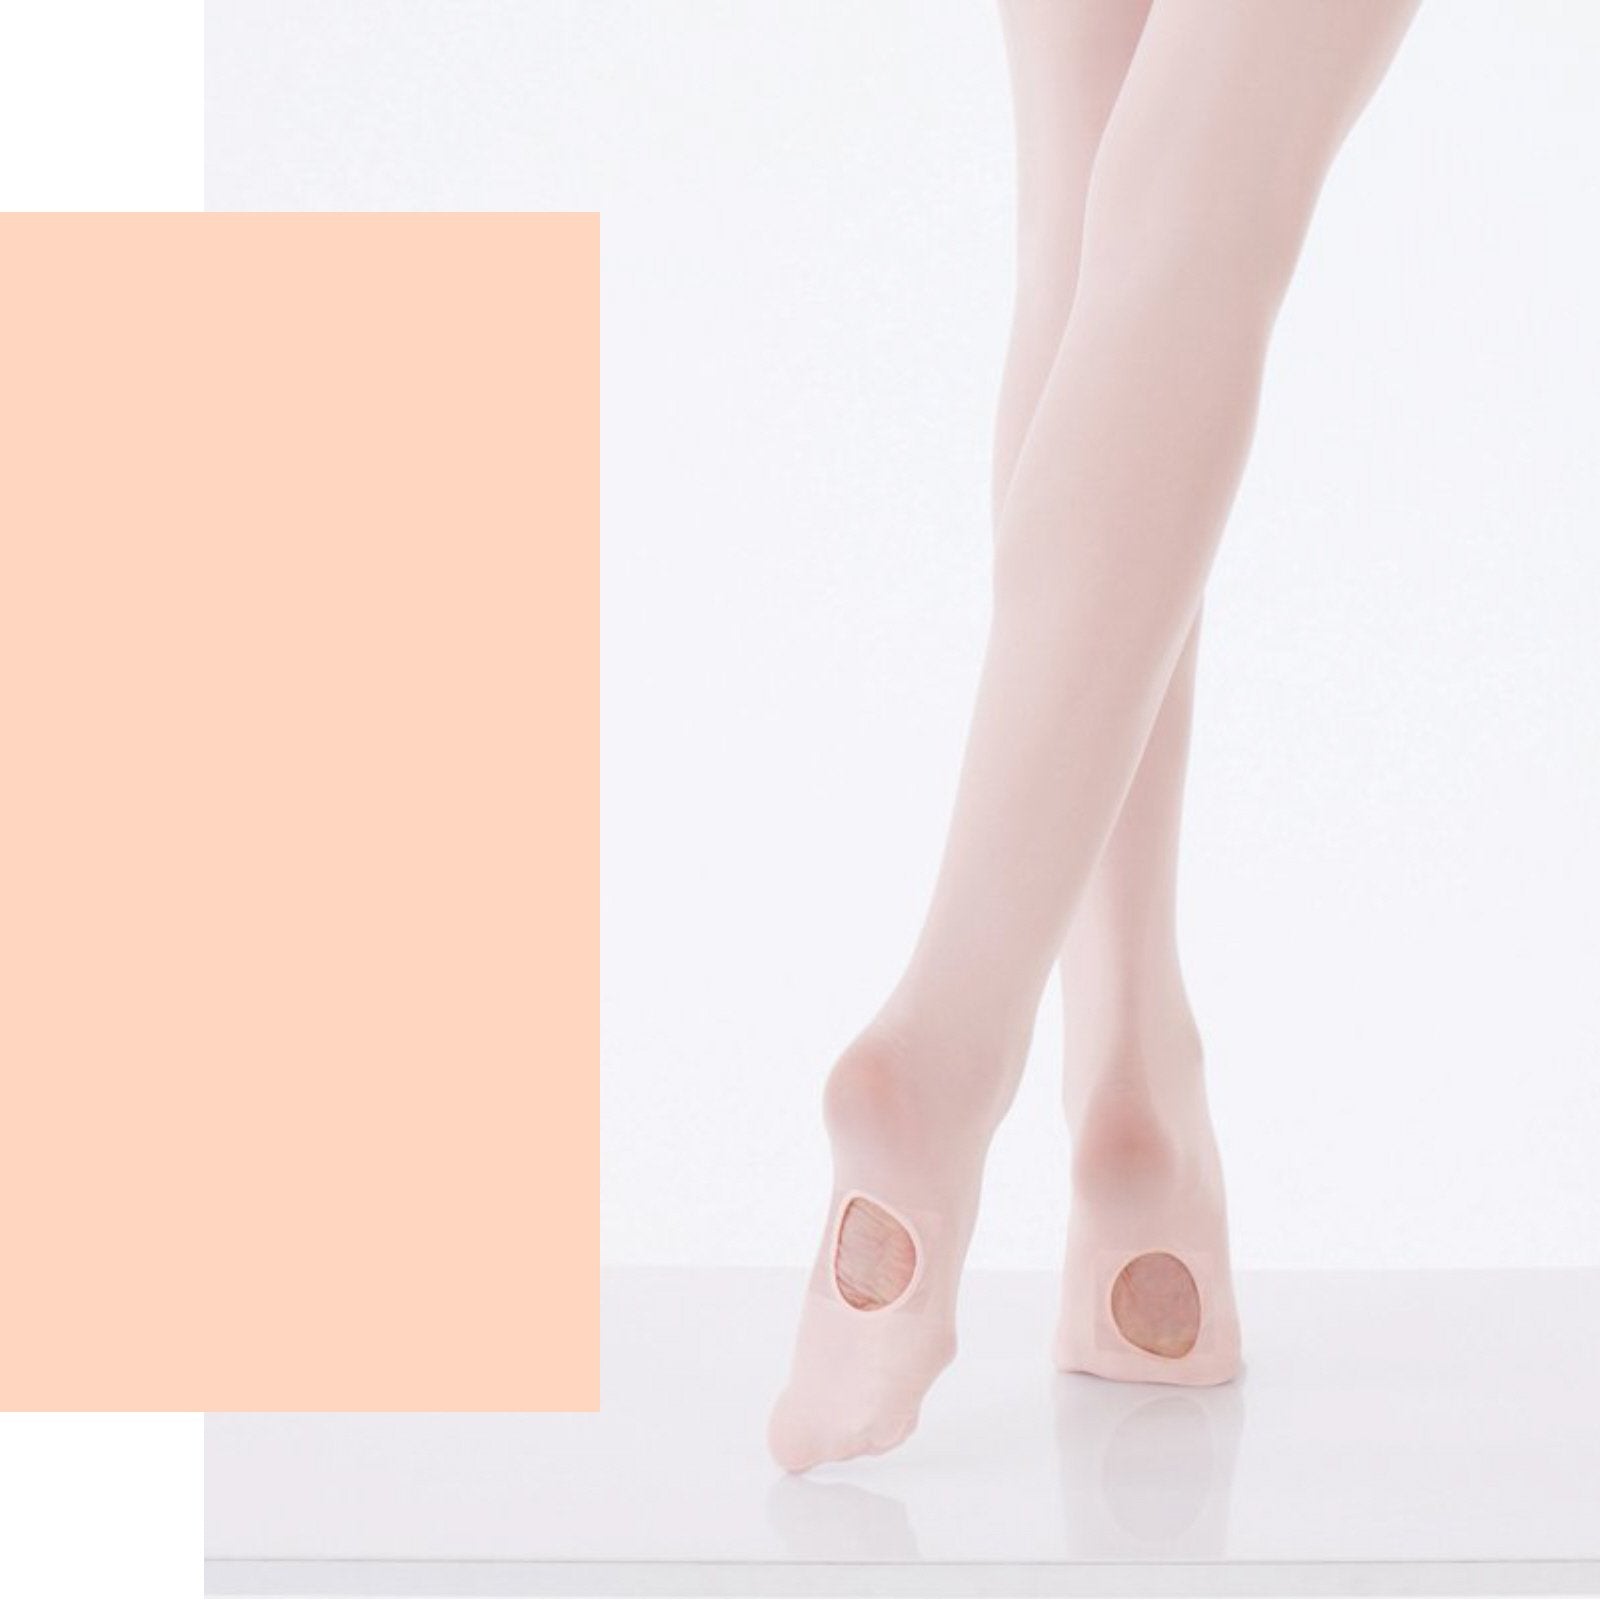  Dance Tights Adult Women Pink Ballet Tights Soft